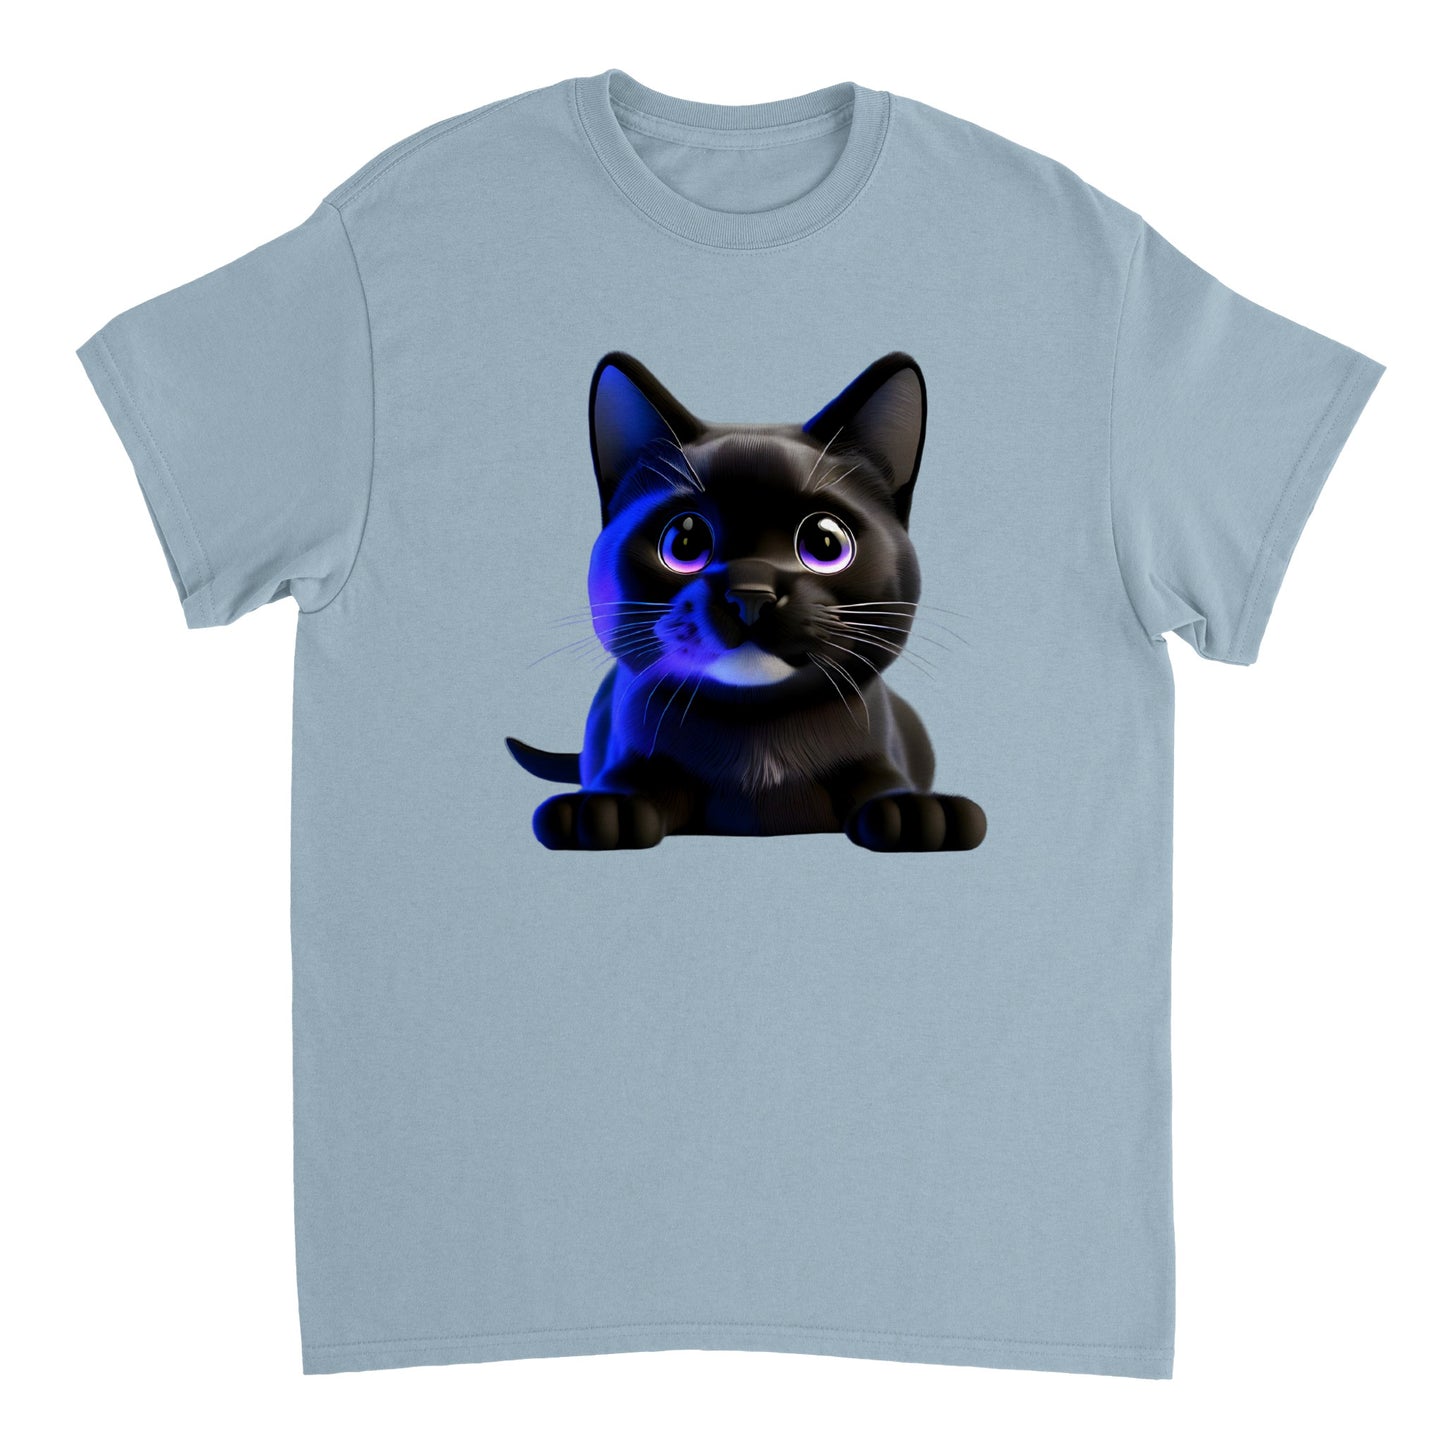 Adorable, Cool, Cute Cats and Kittens Toy - Heavyweight Unisex Crewneck T-shirt 11